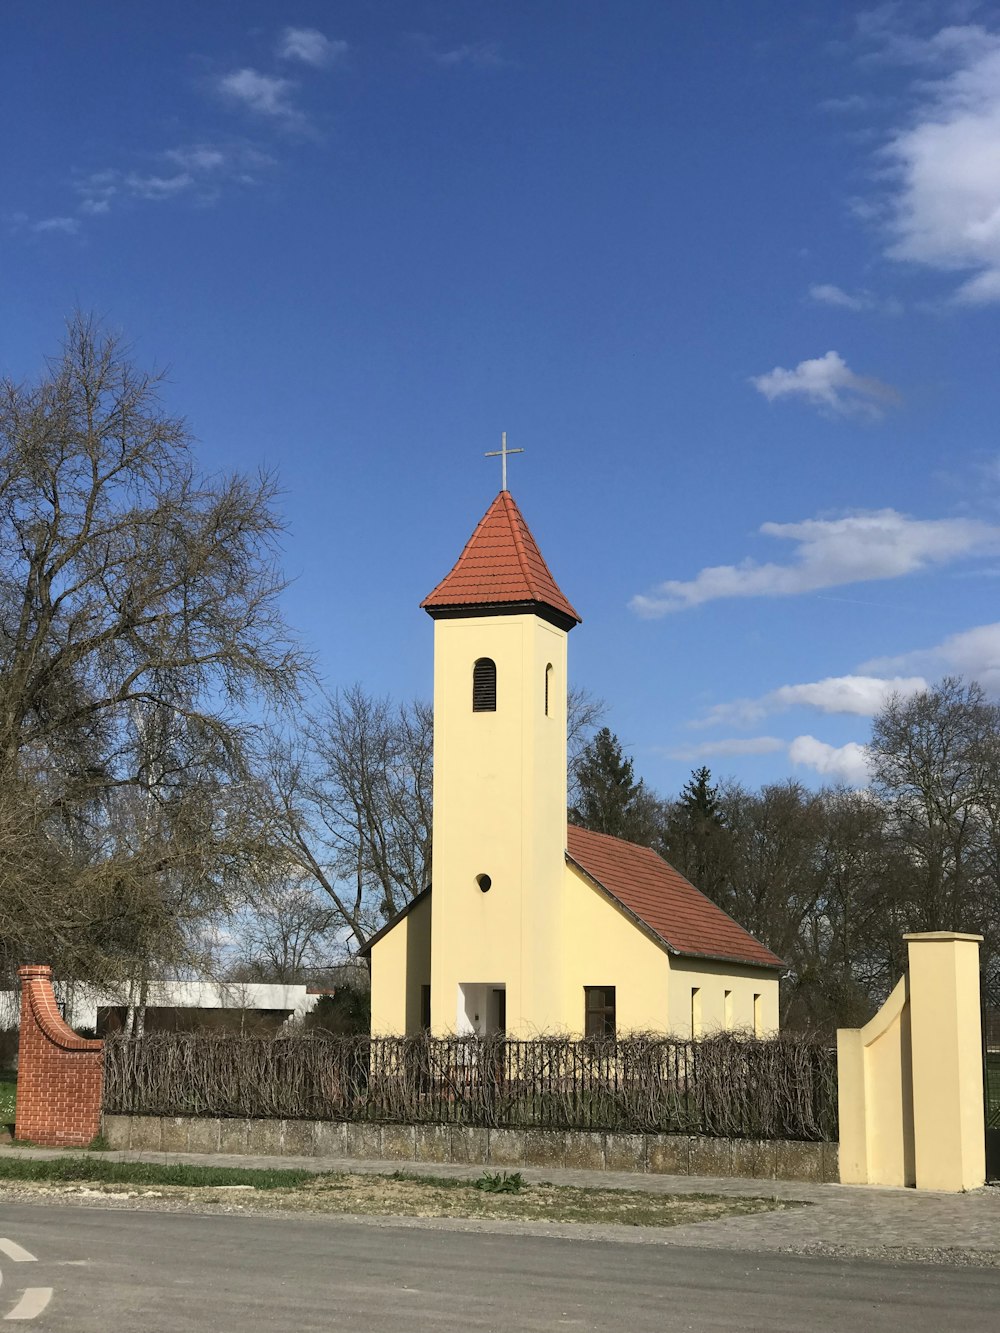 a yellow church with a red roof and a fence